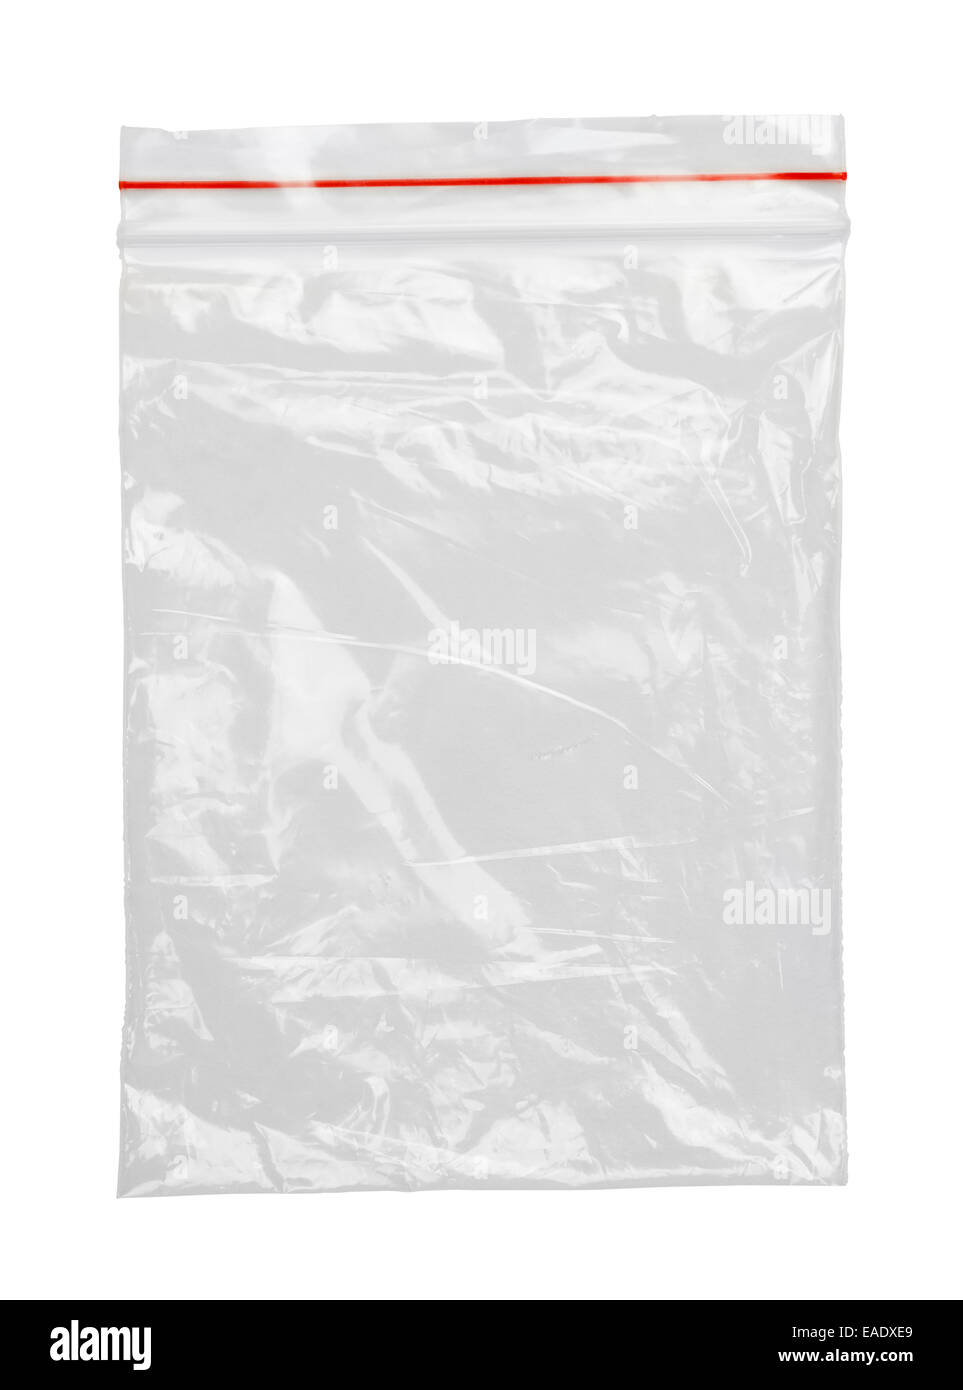 https://c8.alamy.com/comp/EADXE9/clear-plastic-bag-with-red-seal-isolated-on-white-background-EADXE9.jpg